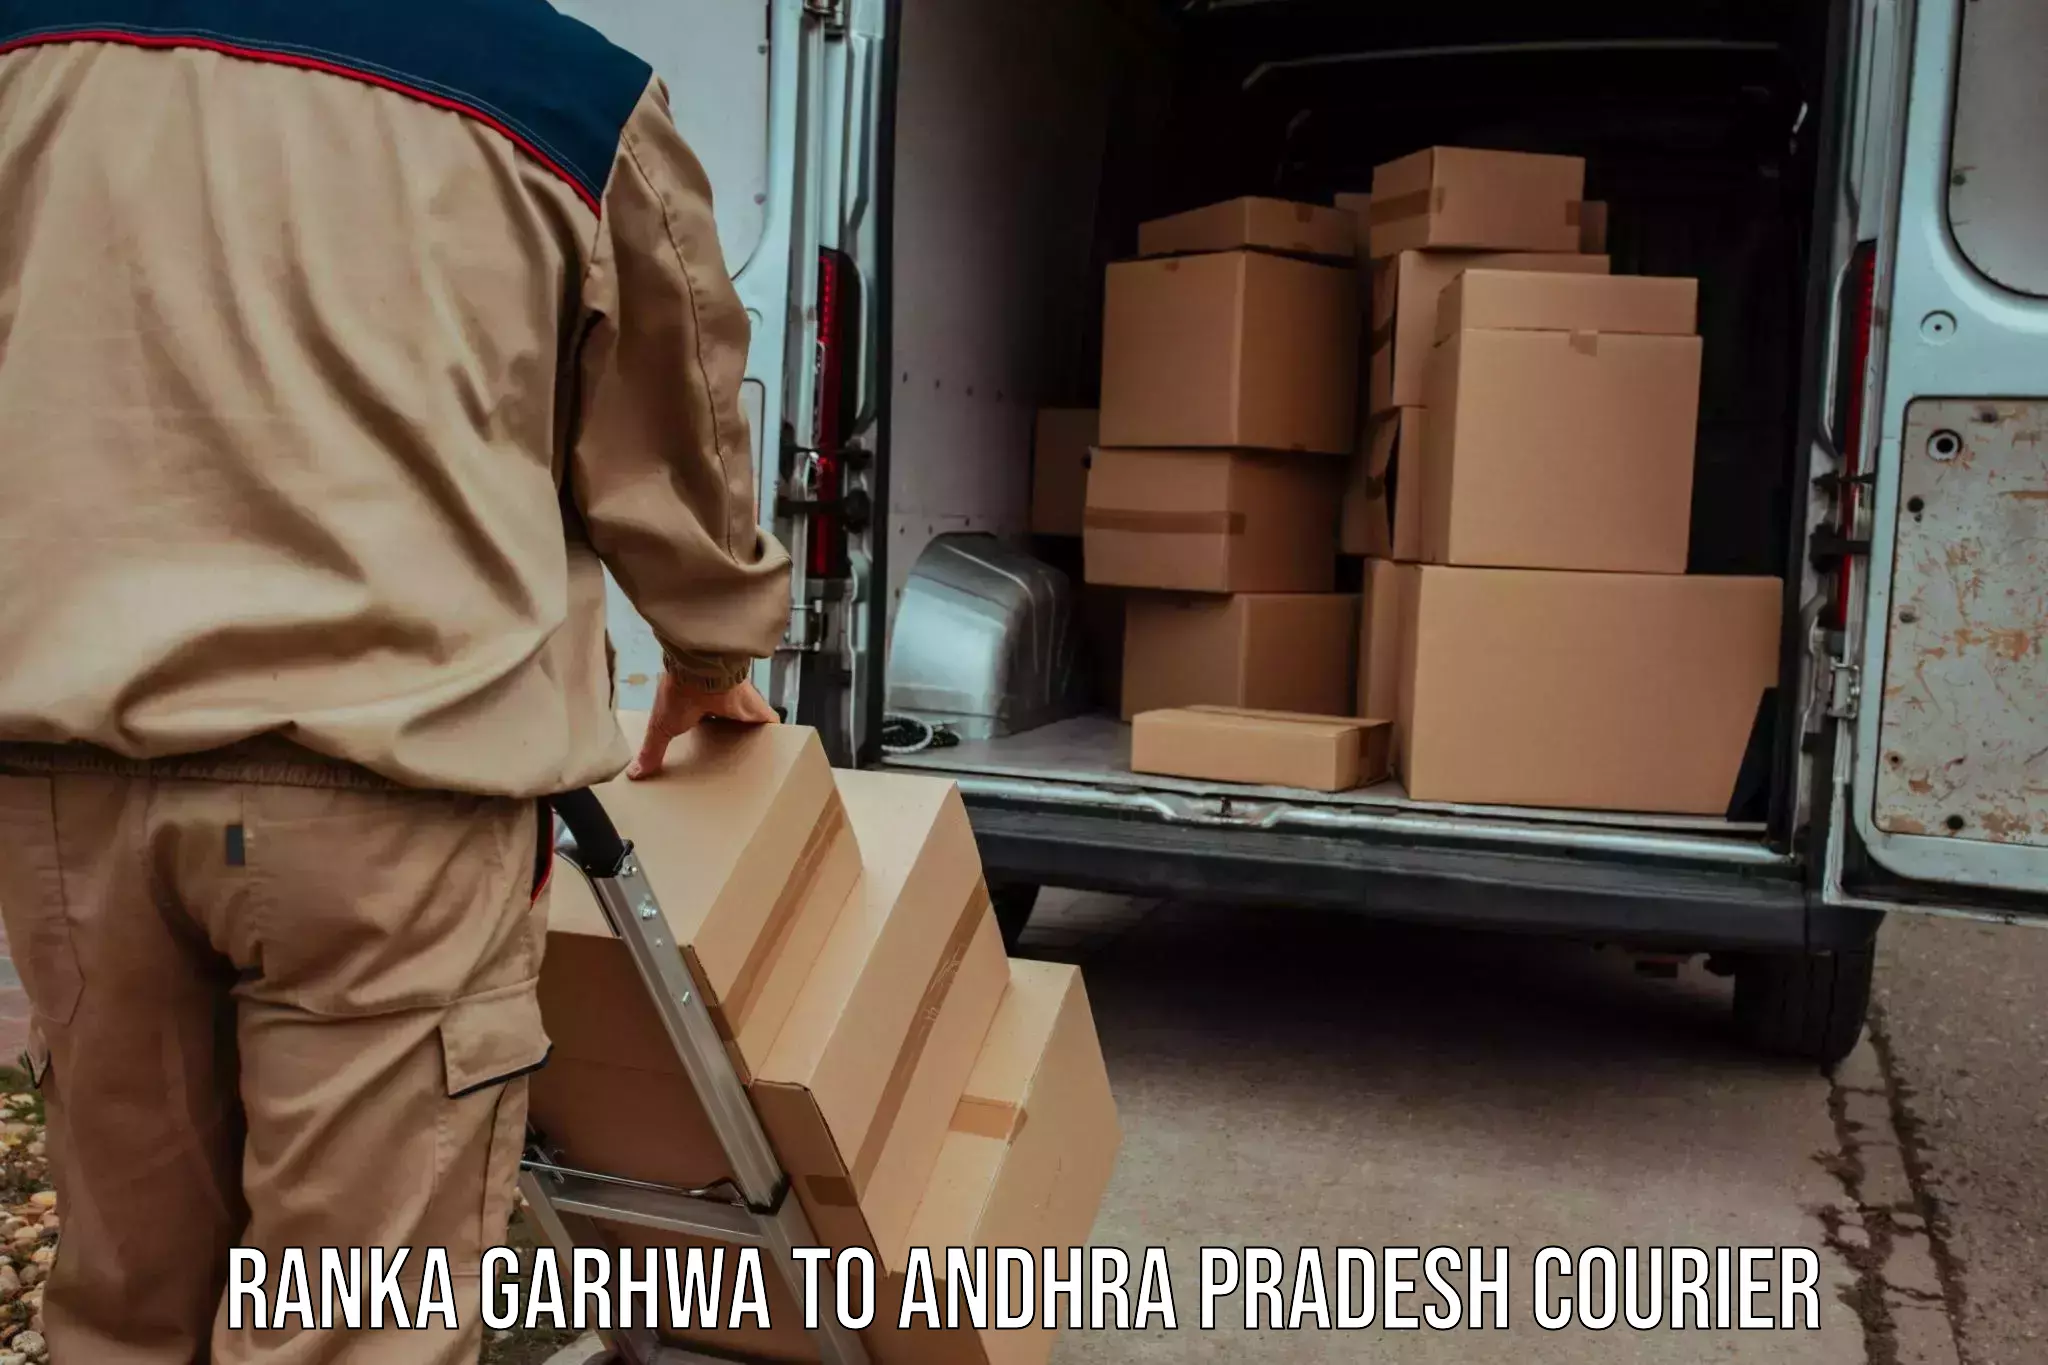 Easy access courier services Ranka Garhwa to Chintalapudi